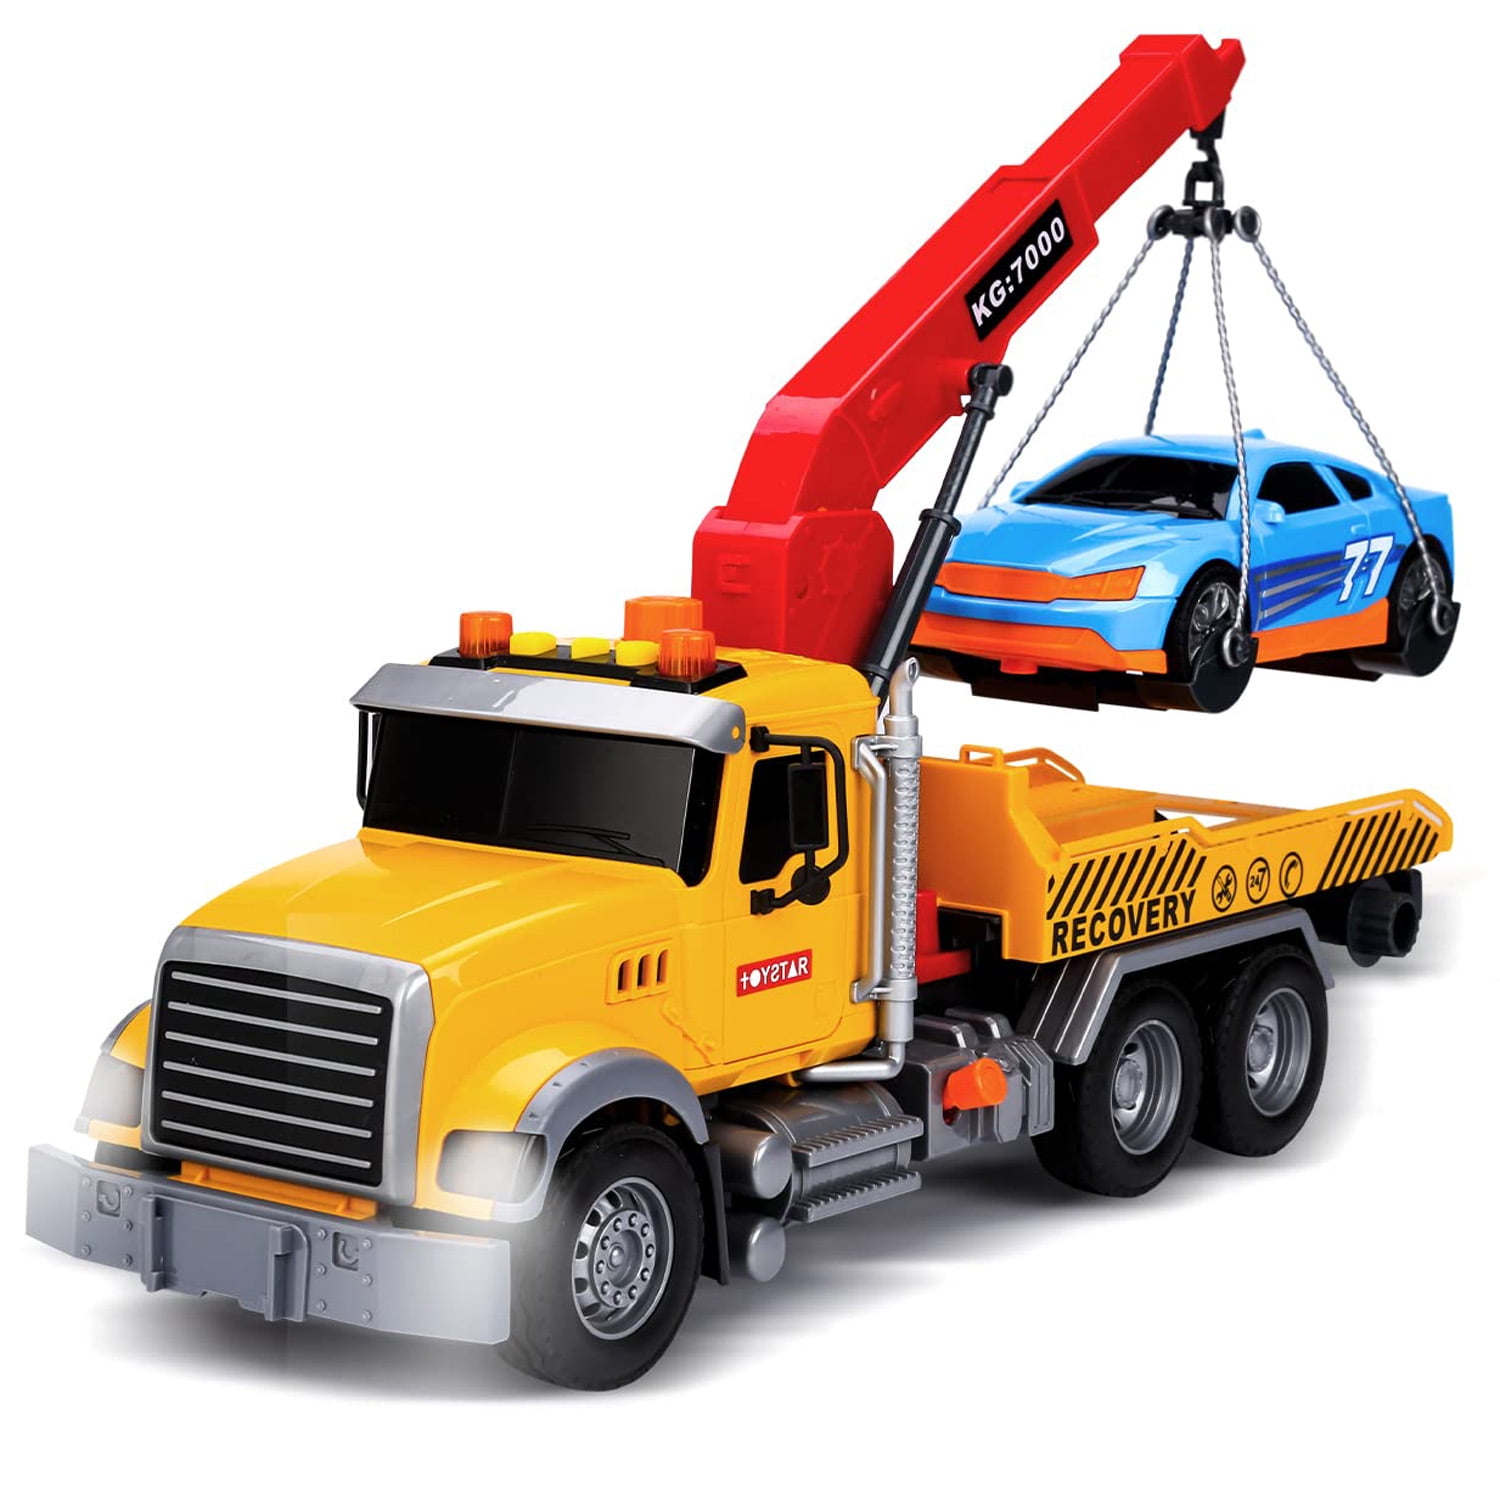 KIDSTHRILL 4 Small Set Construction Trucks for Kids Toys for 3+ Year Old  Boys & Girls - Digger, Dump Truck, Excavator Toy Cement Mixer and Crane